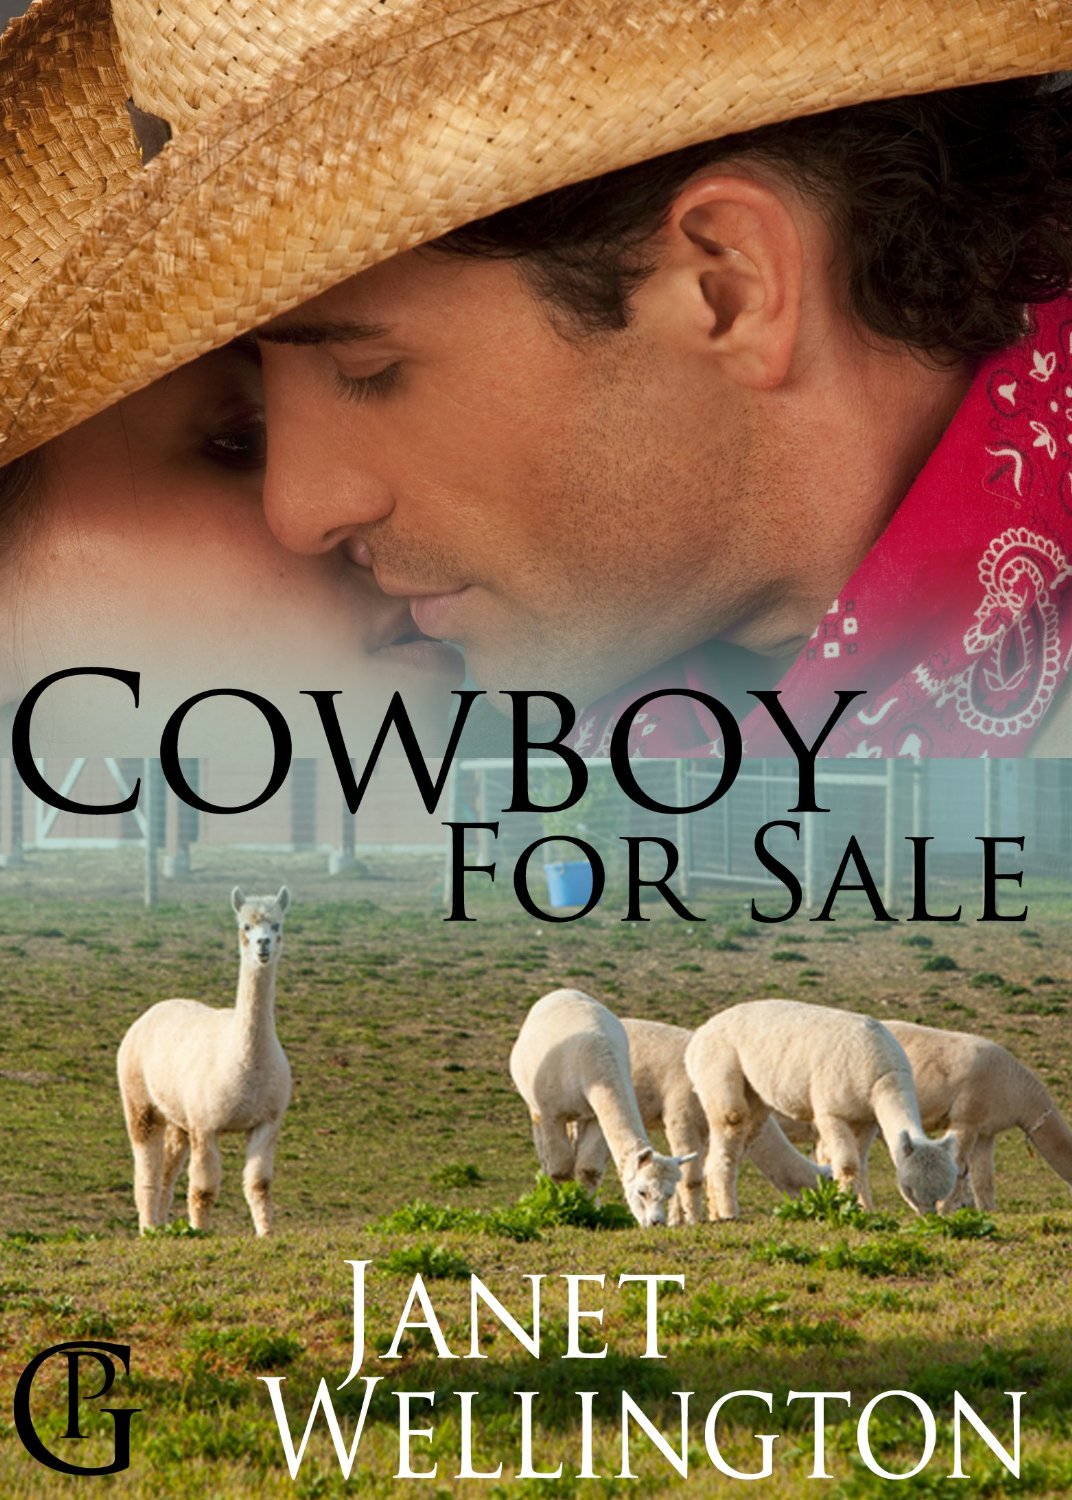 COWBOY FOR SALE by Janet Wellington